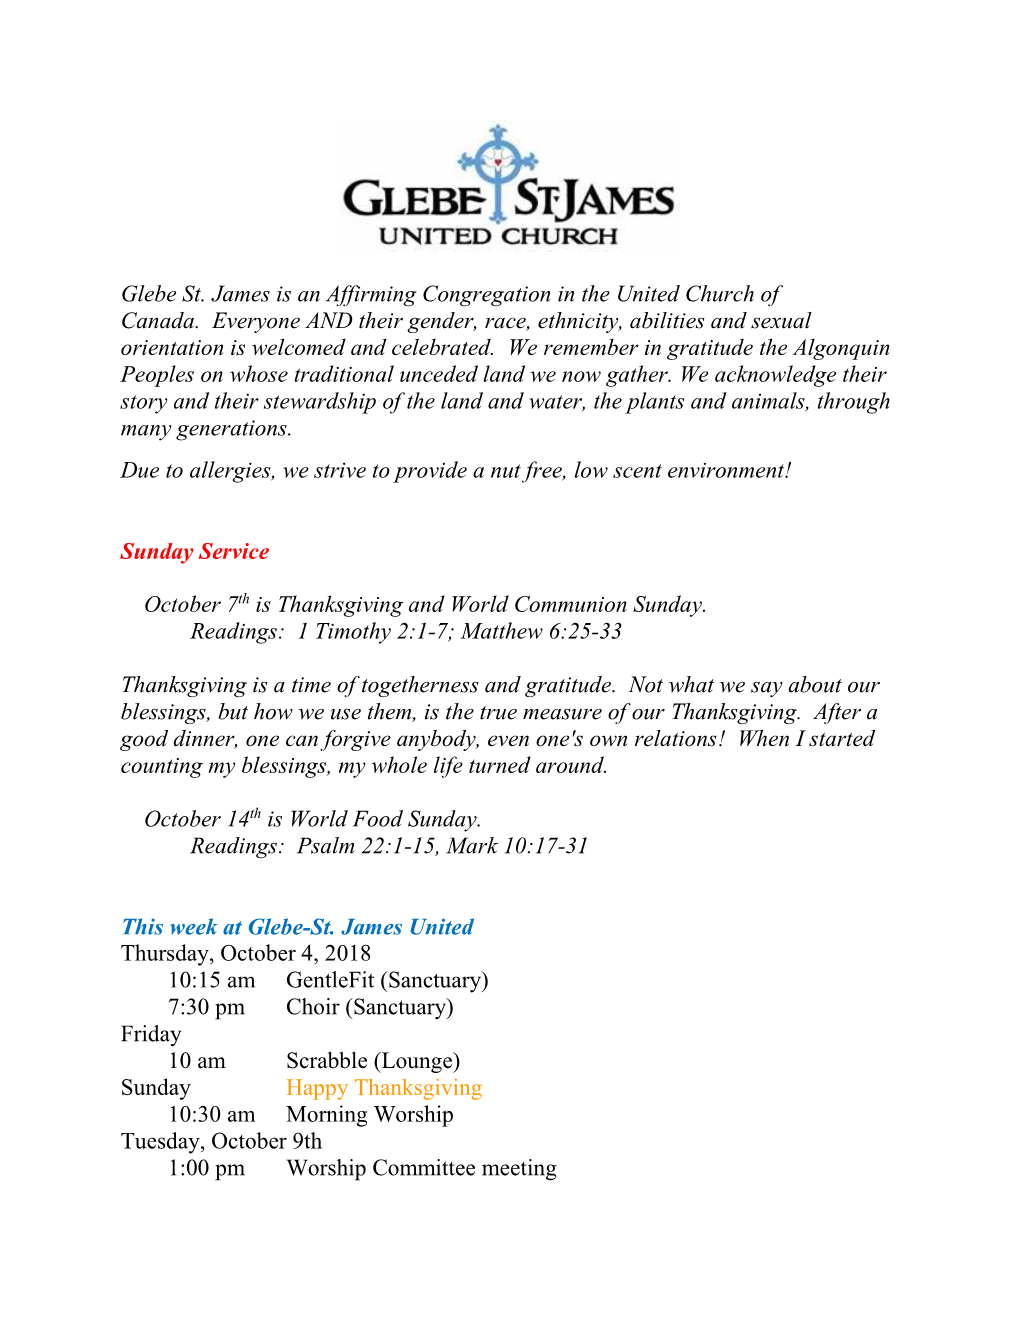 Glebe St. James Is an Affirming Congregation in the United Church of Canada